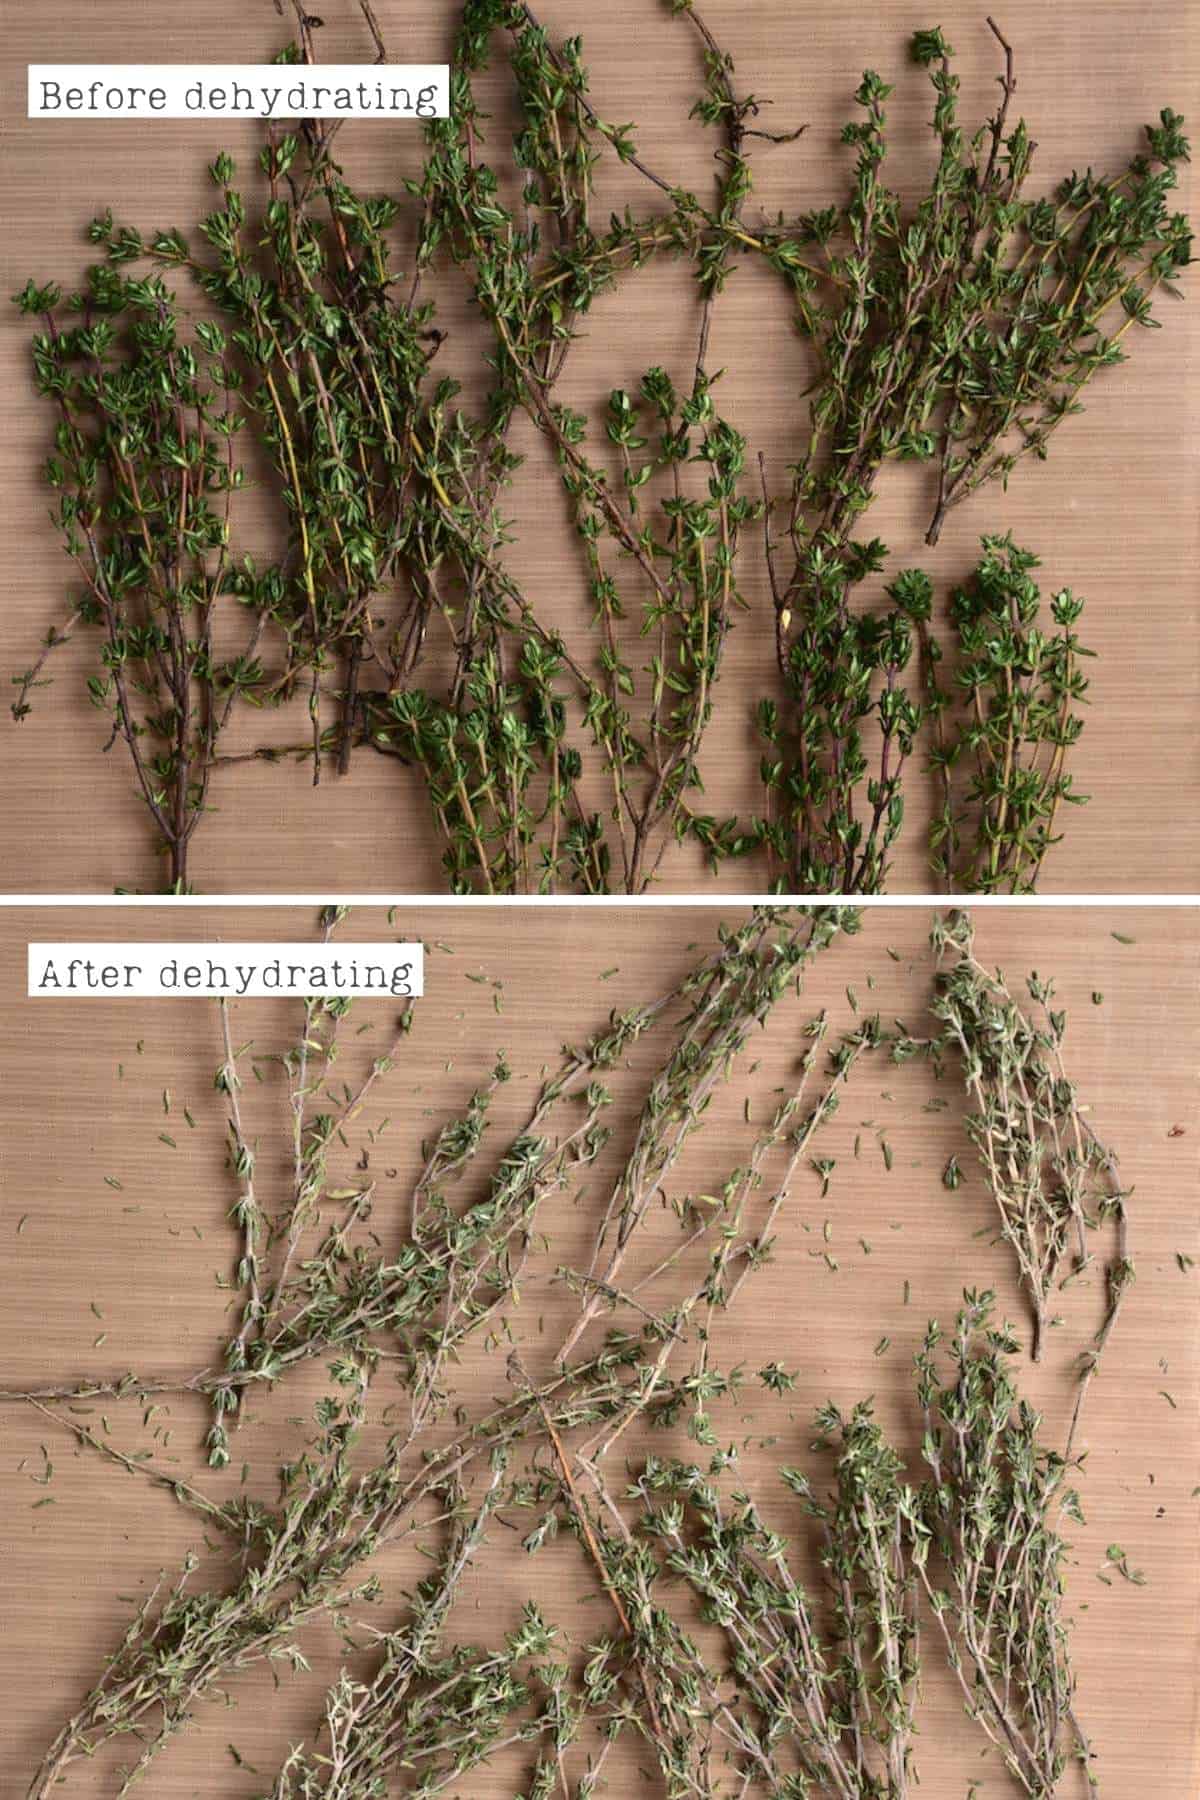 Before and after dehydrating thyme